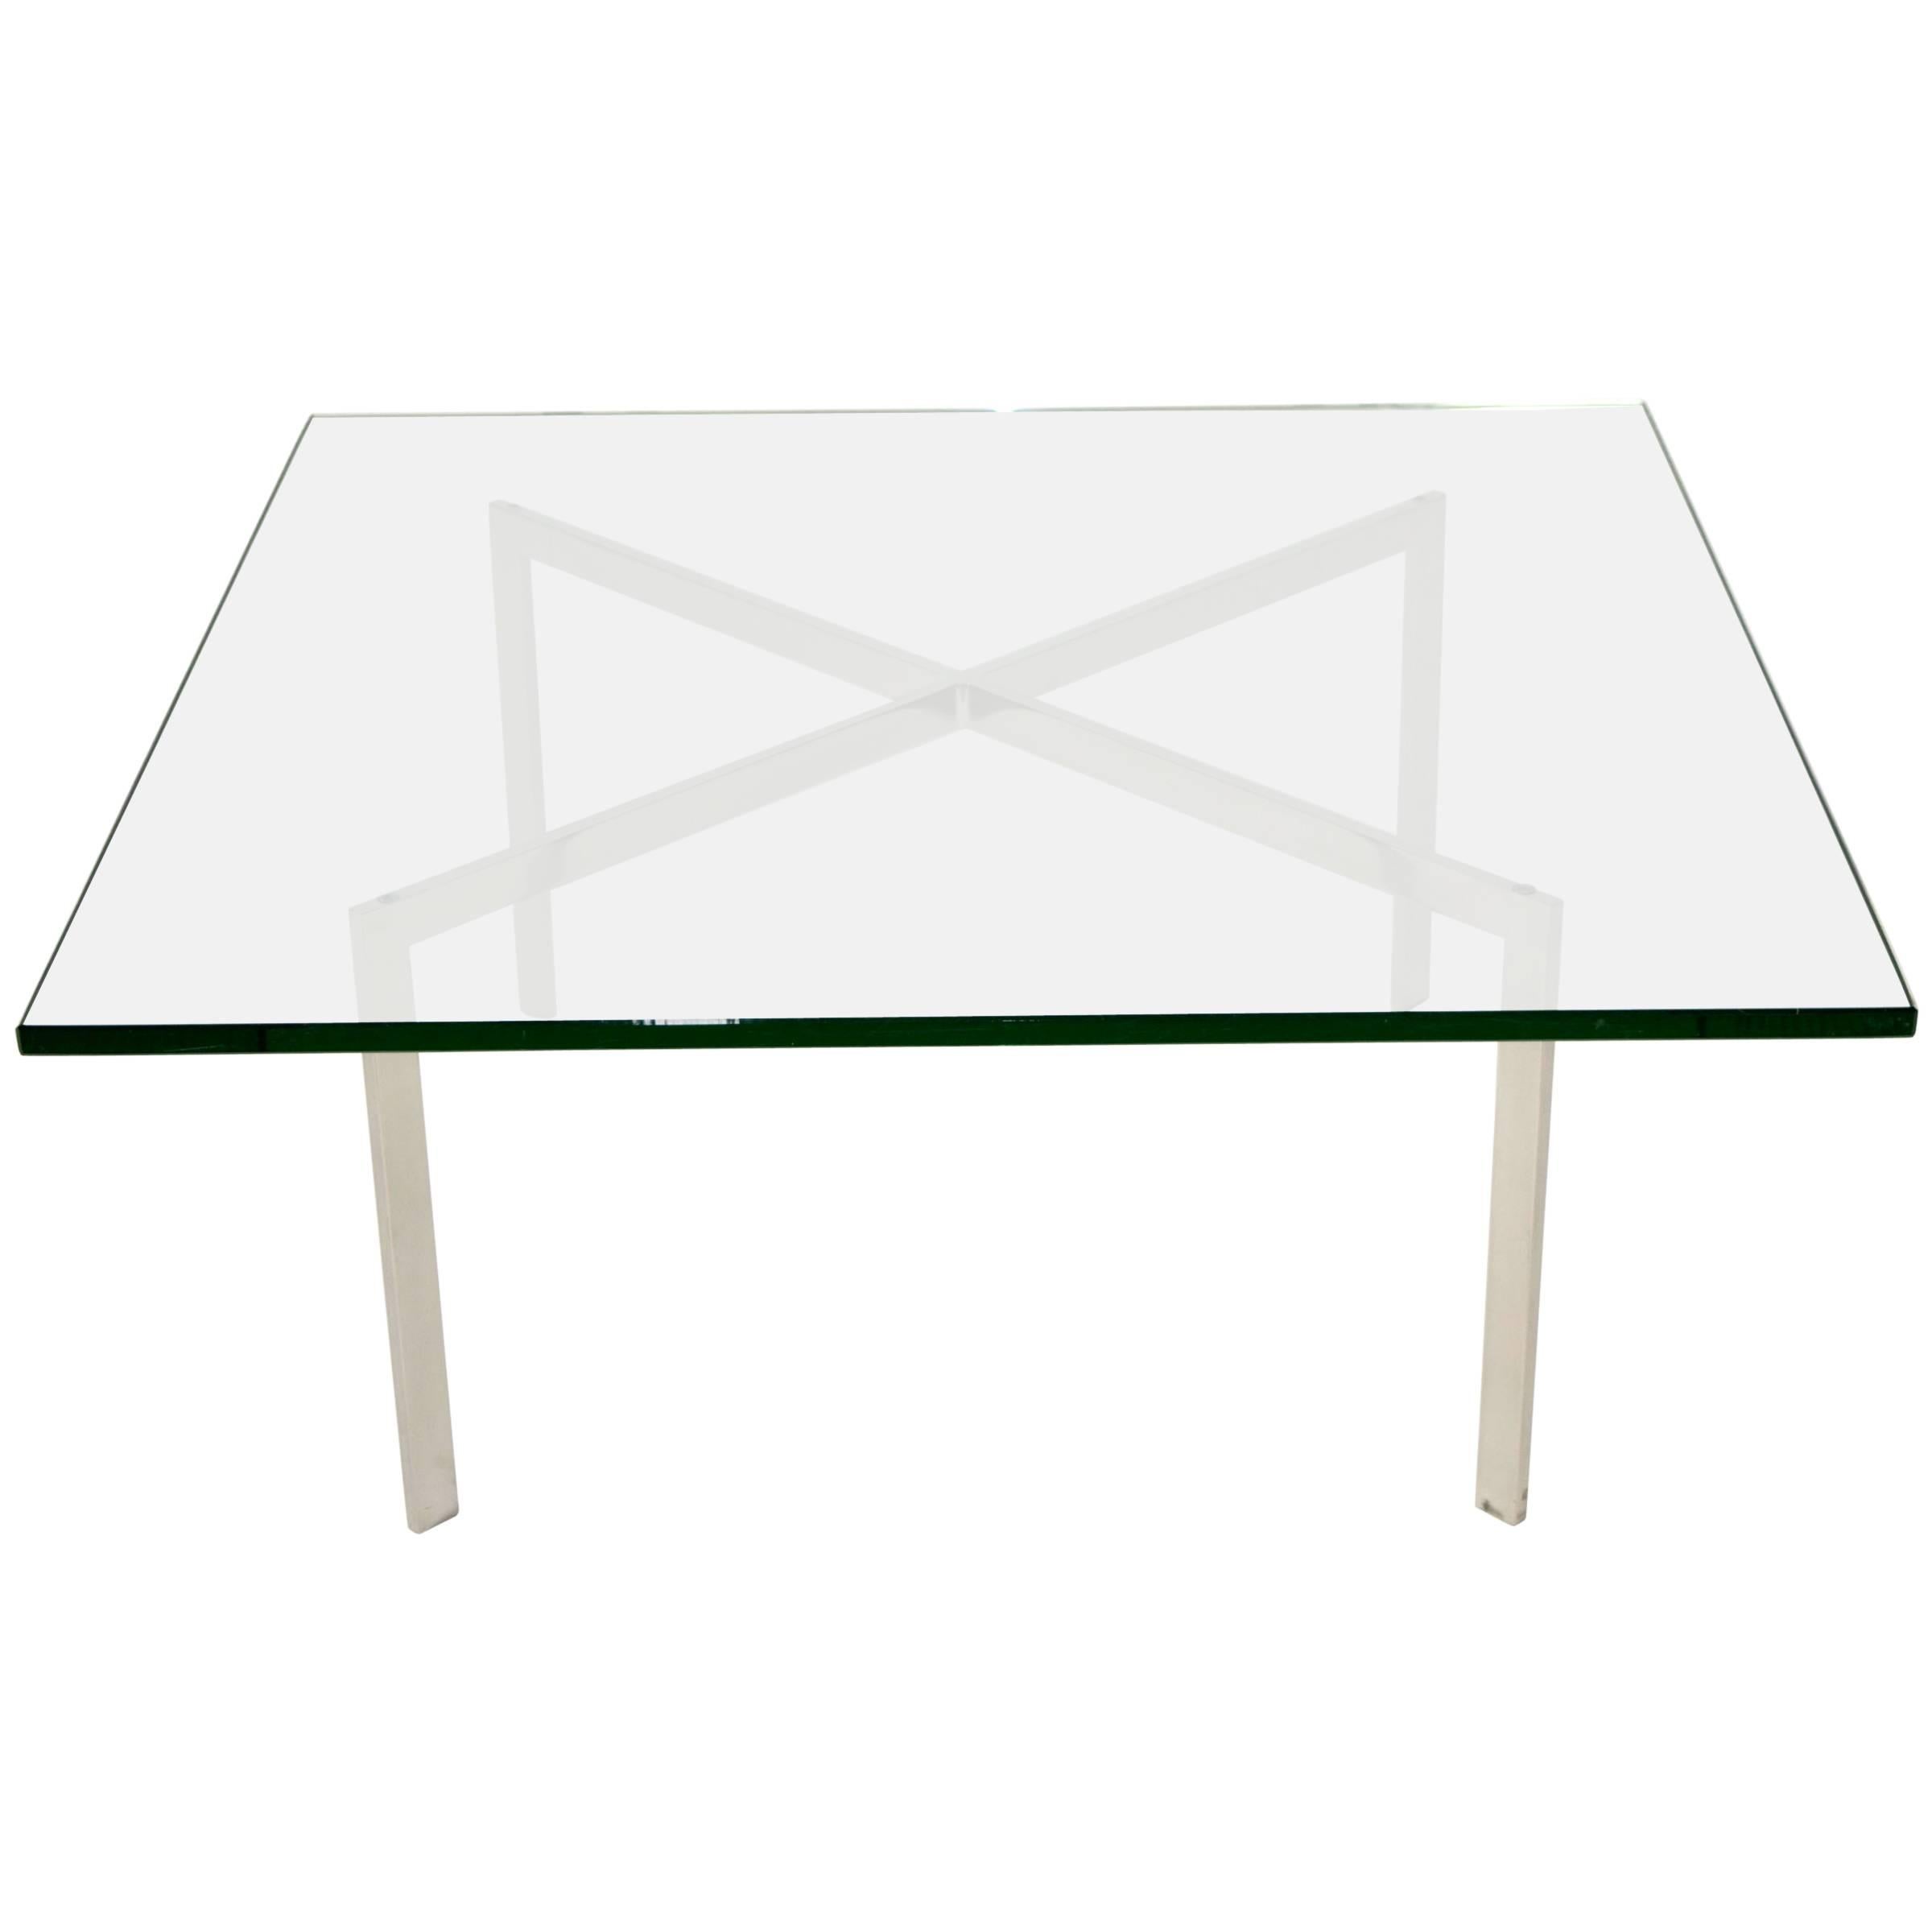 Barcelona Table by Mies van der Rohe for Knoll